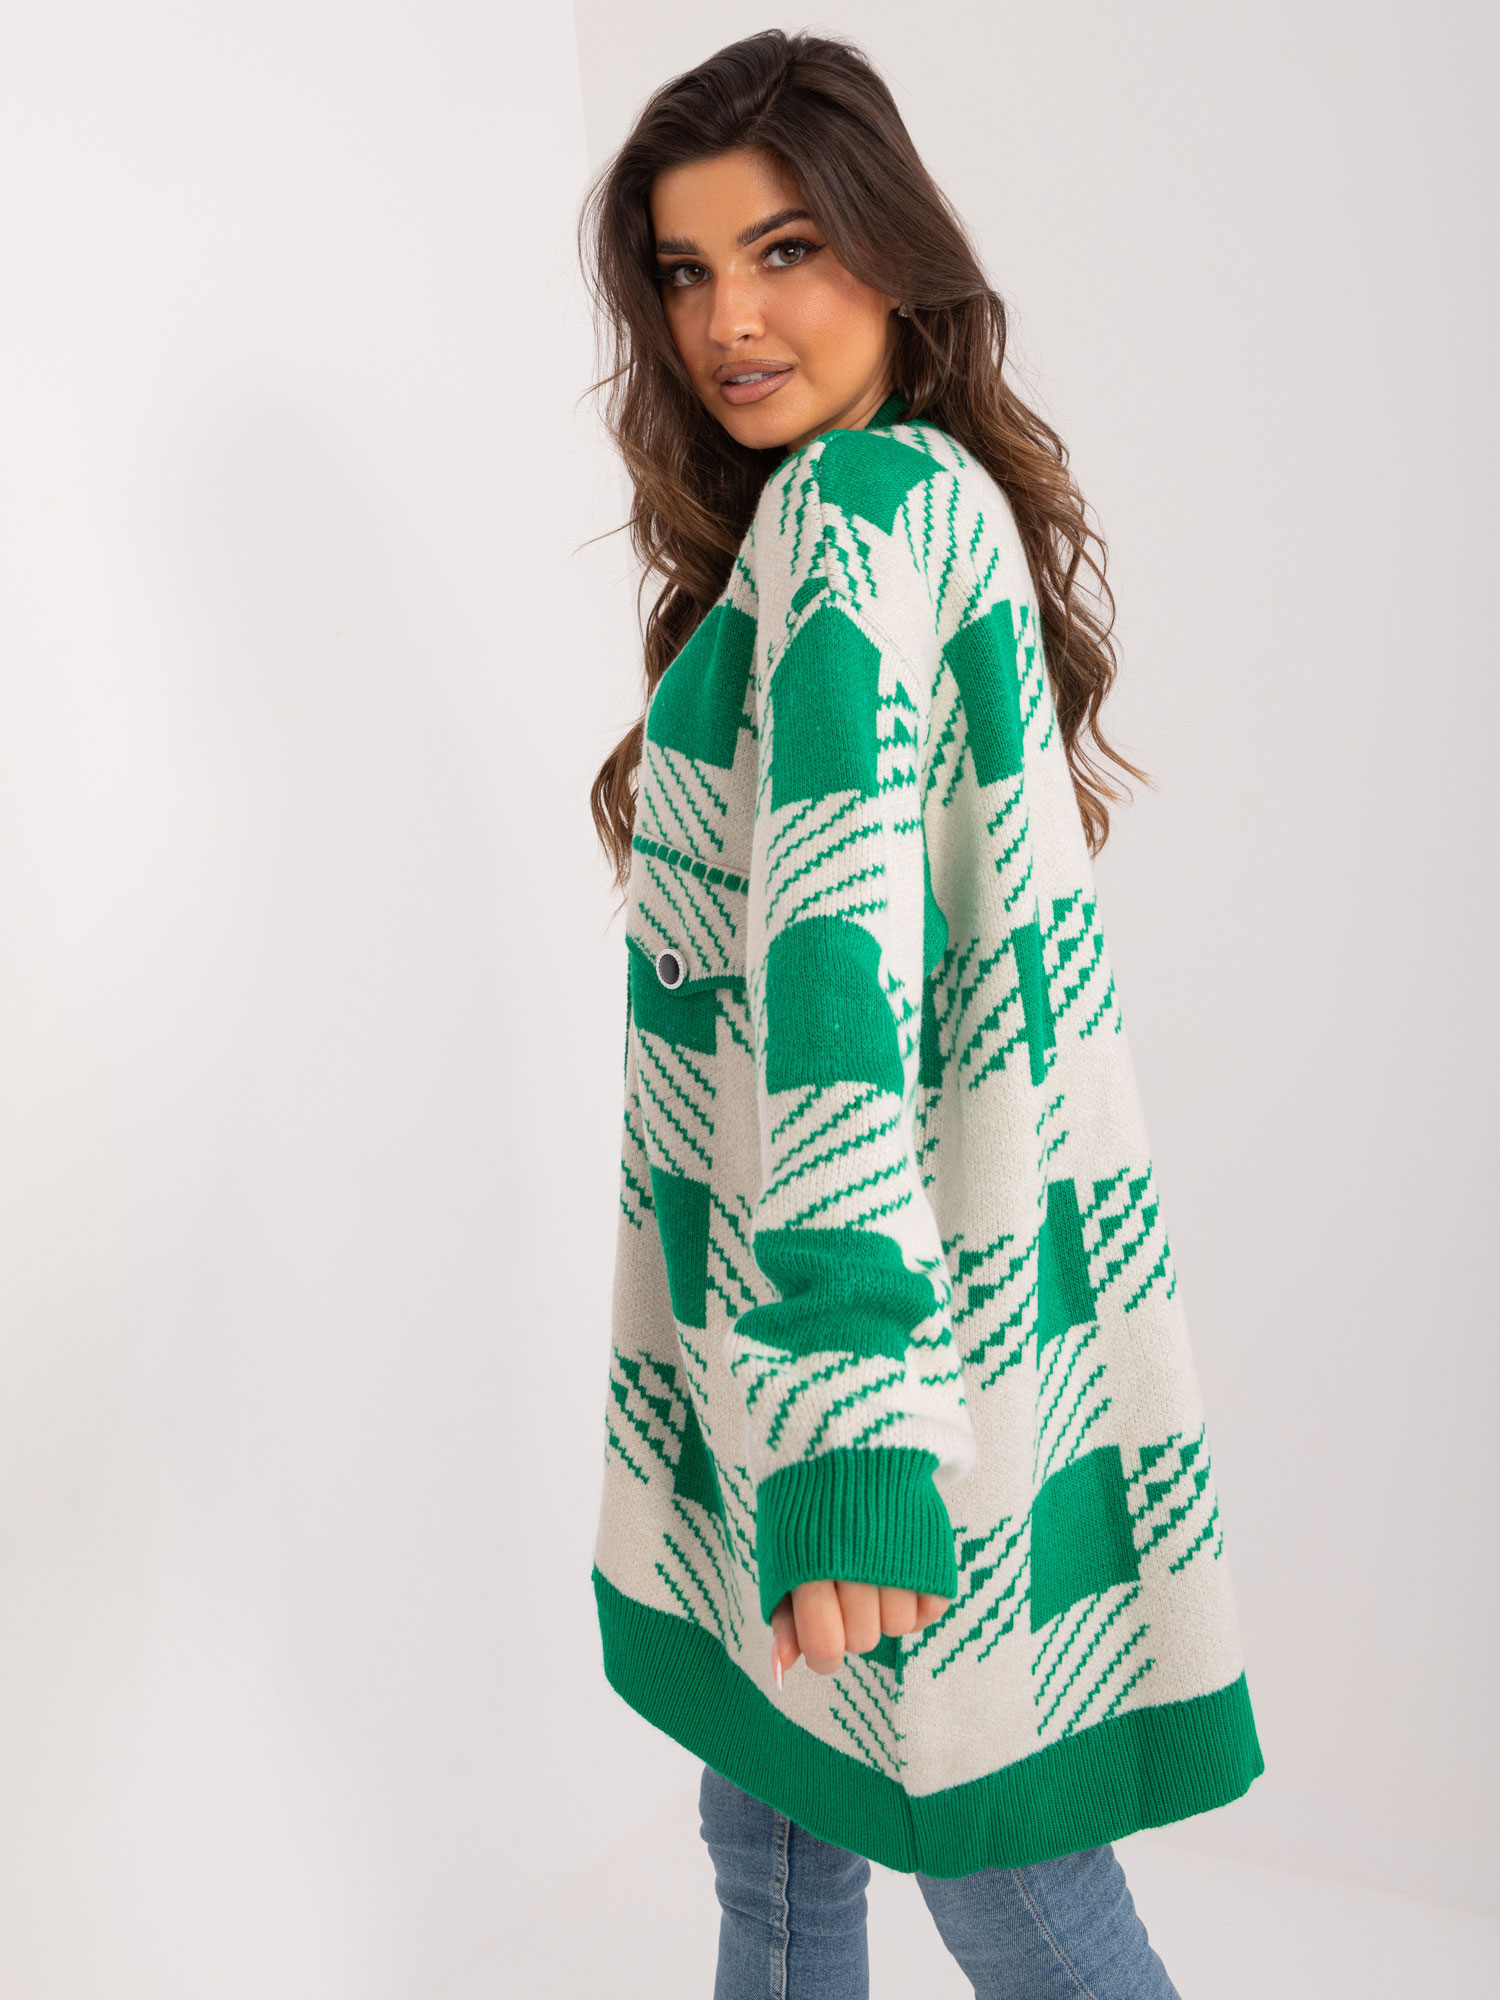 Green and beige oversize sweater with geometric pattern